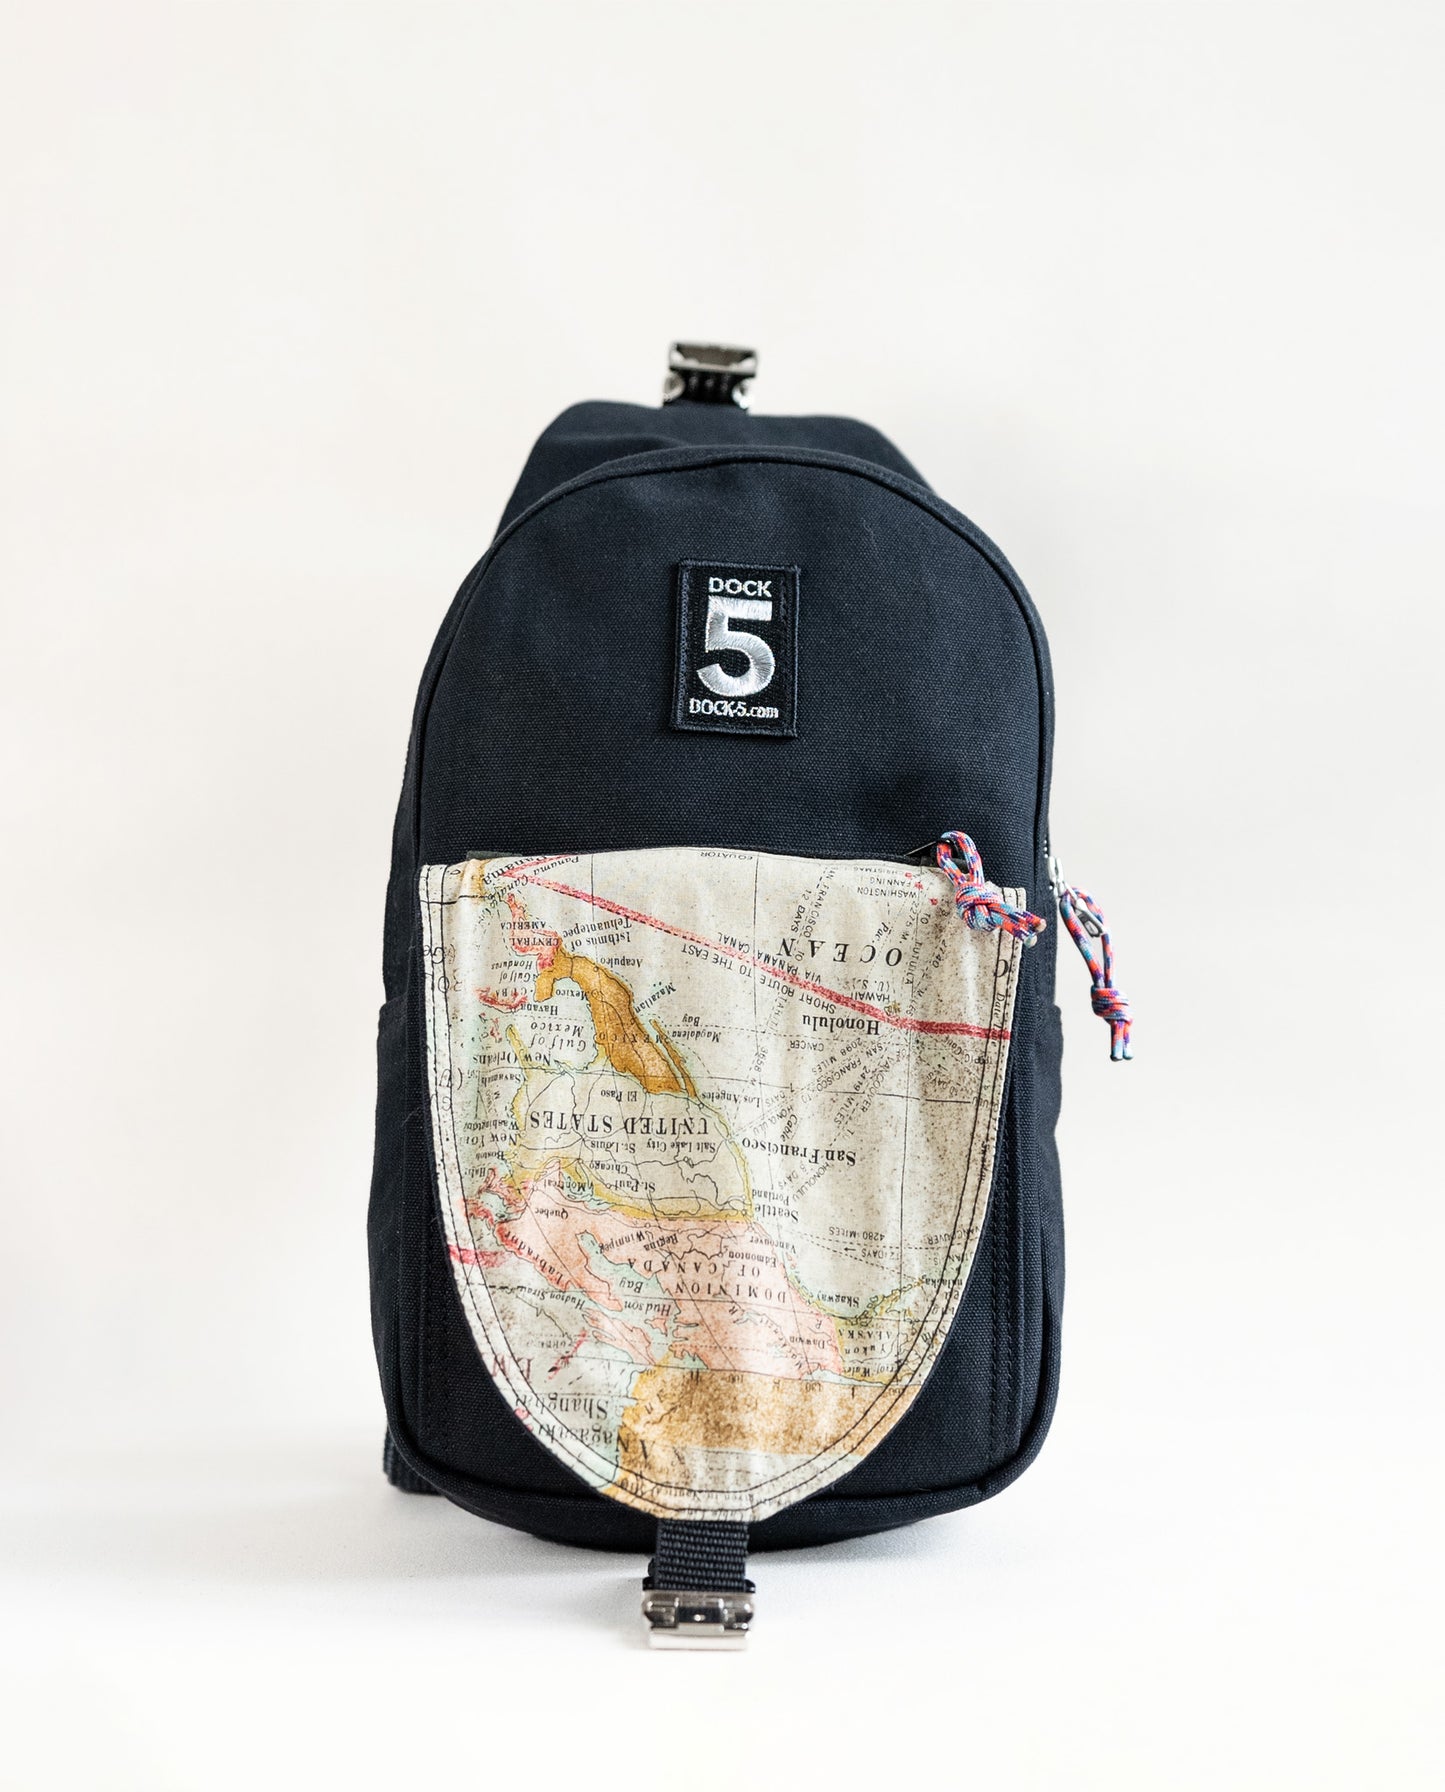 Dock 5’s hand-sewn Lake Superior Canvas Sling Bag is lined with a vintage ocean map fabric